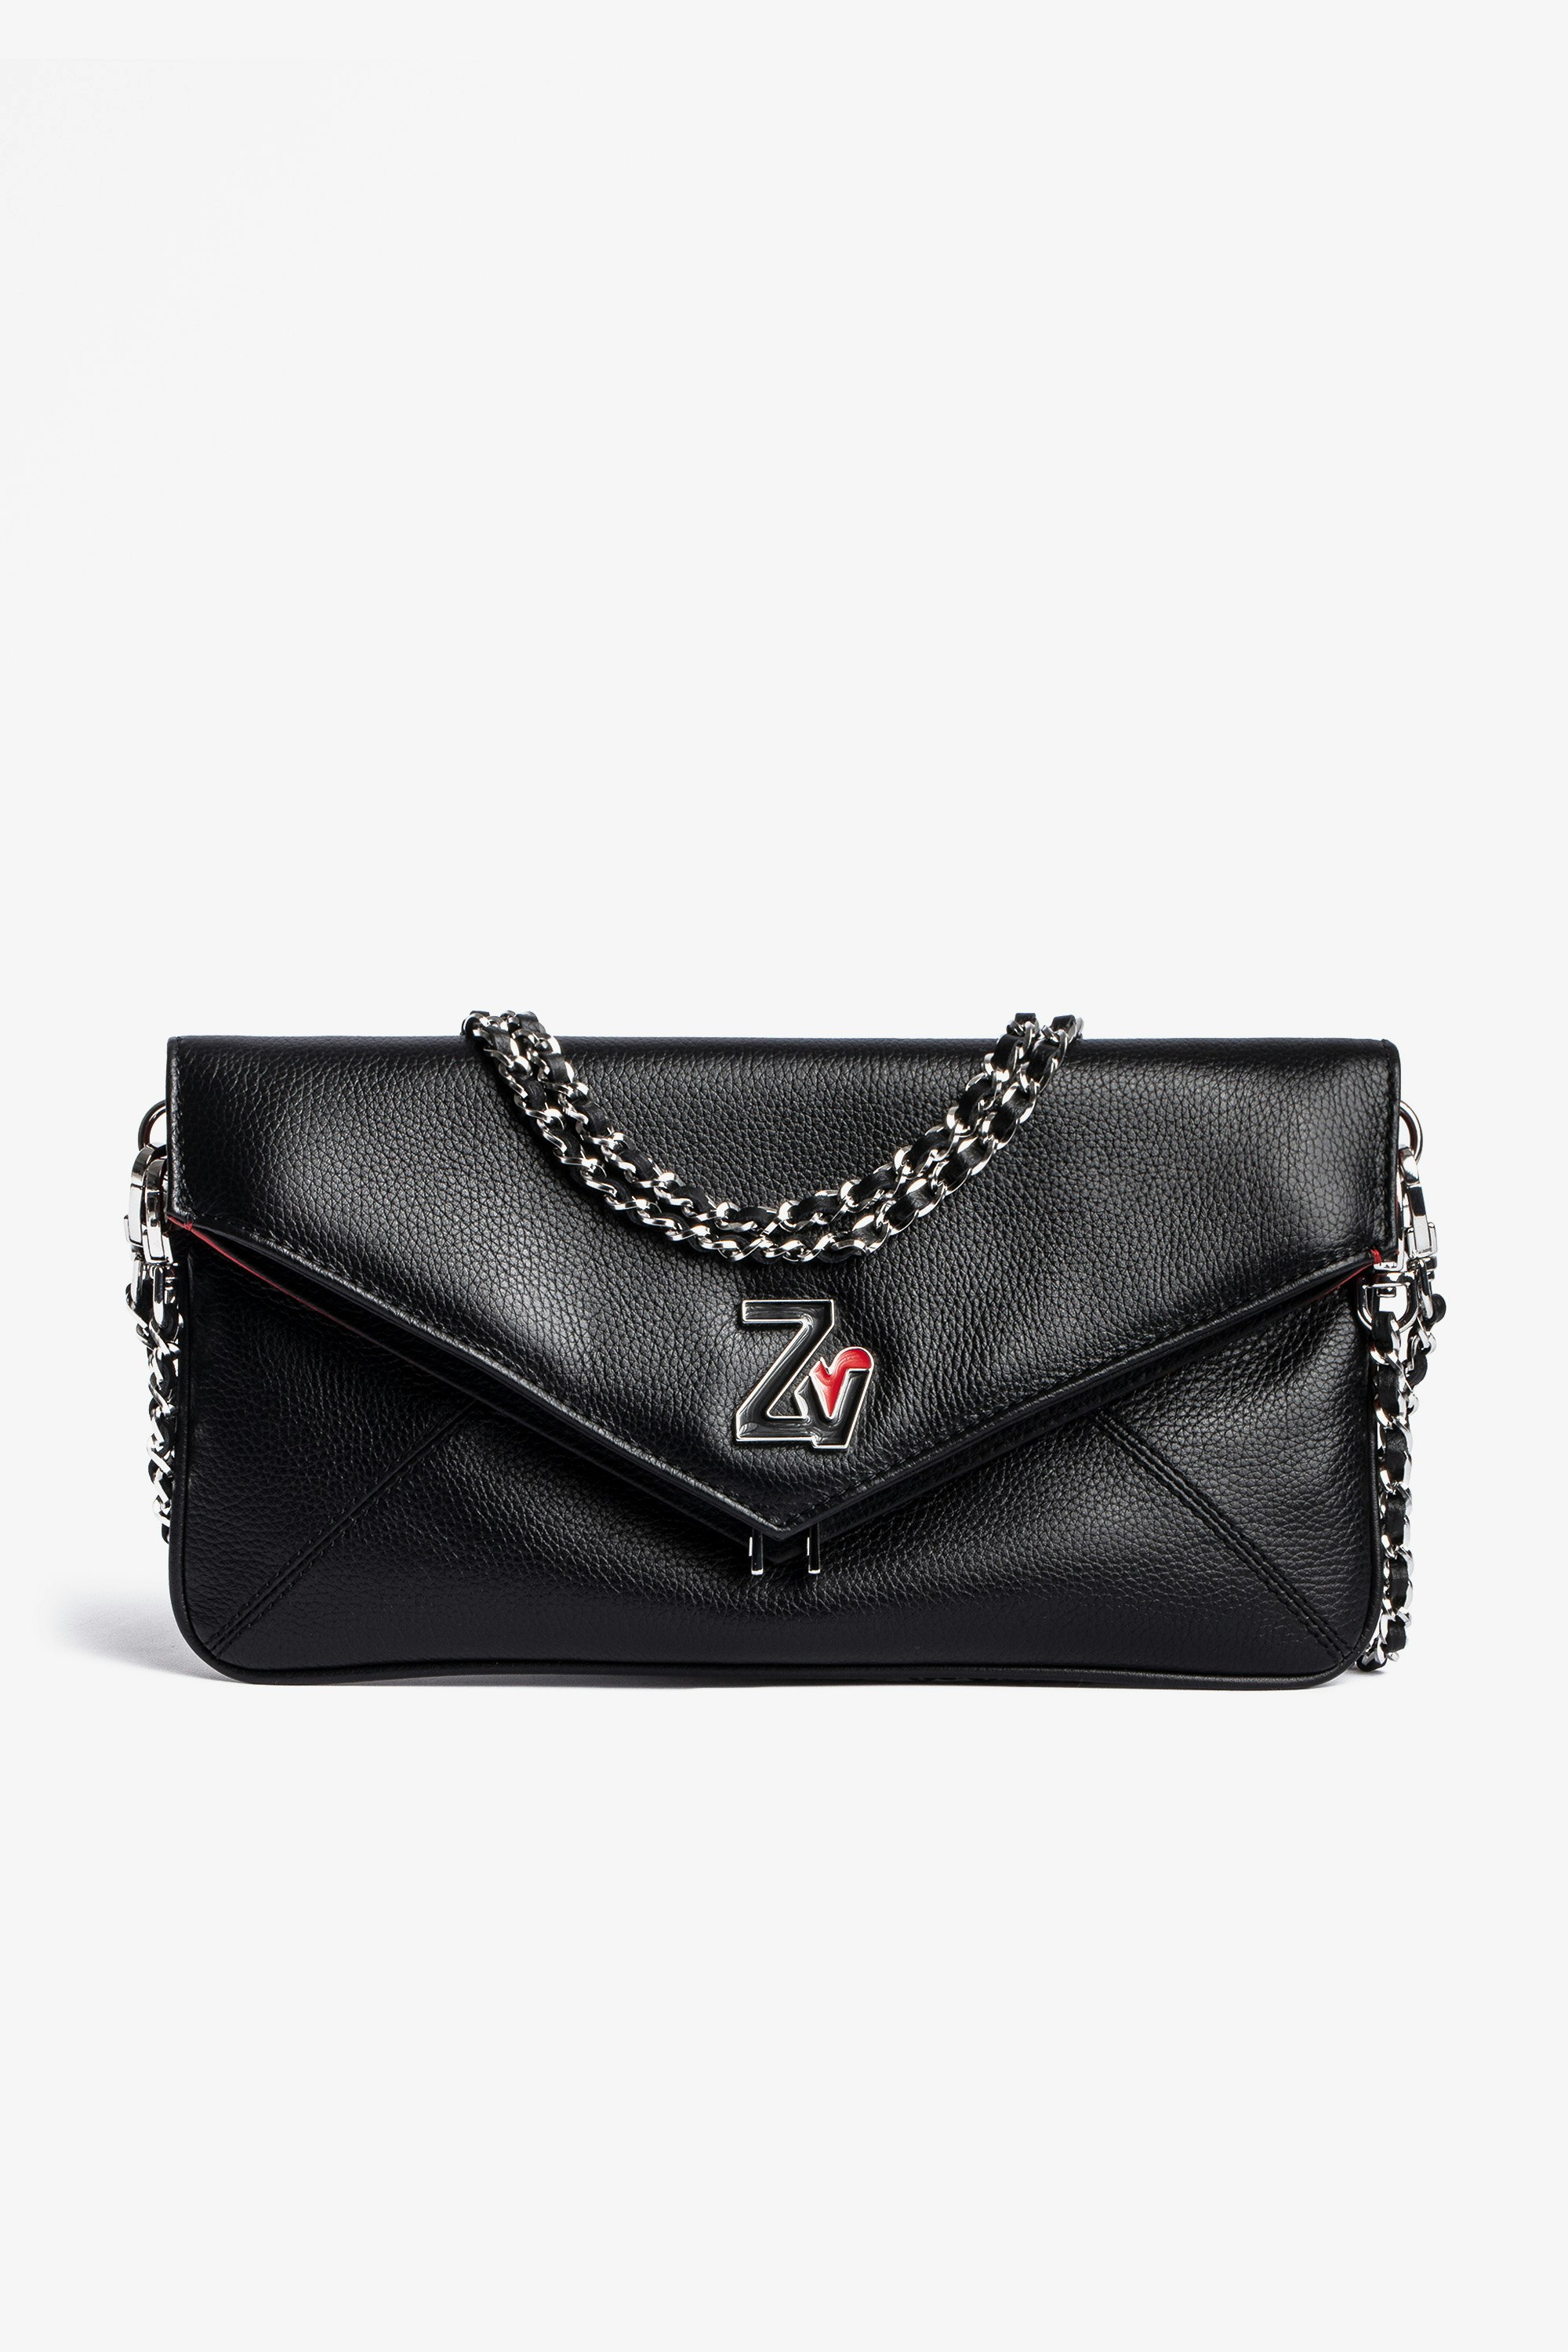 Rockeur クラッチバッグ Women’s clutch bag in black grained leather